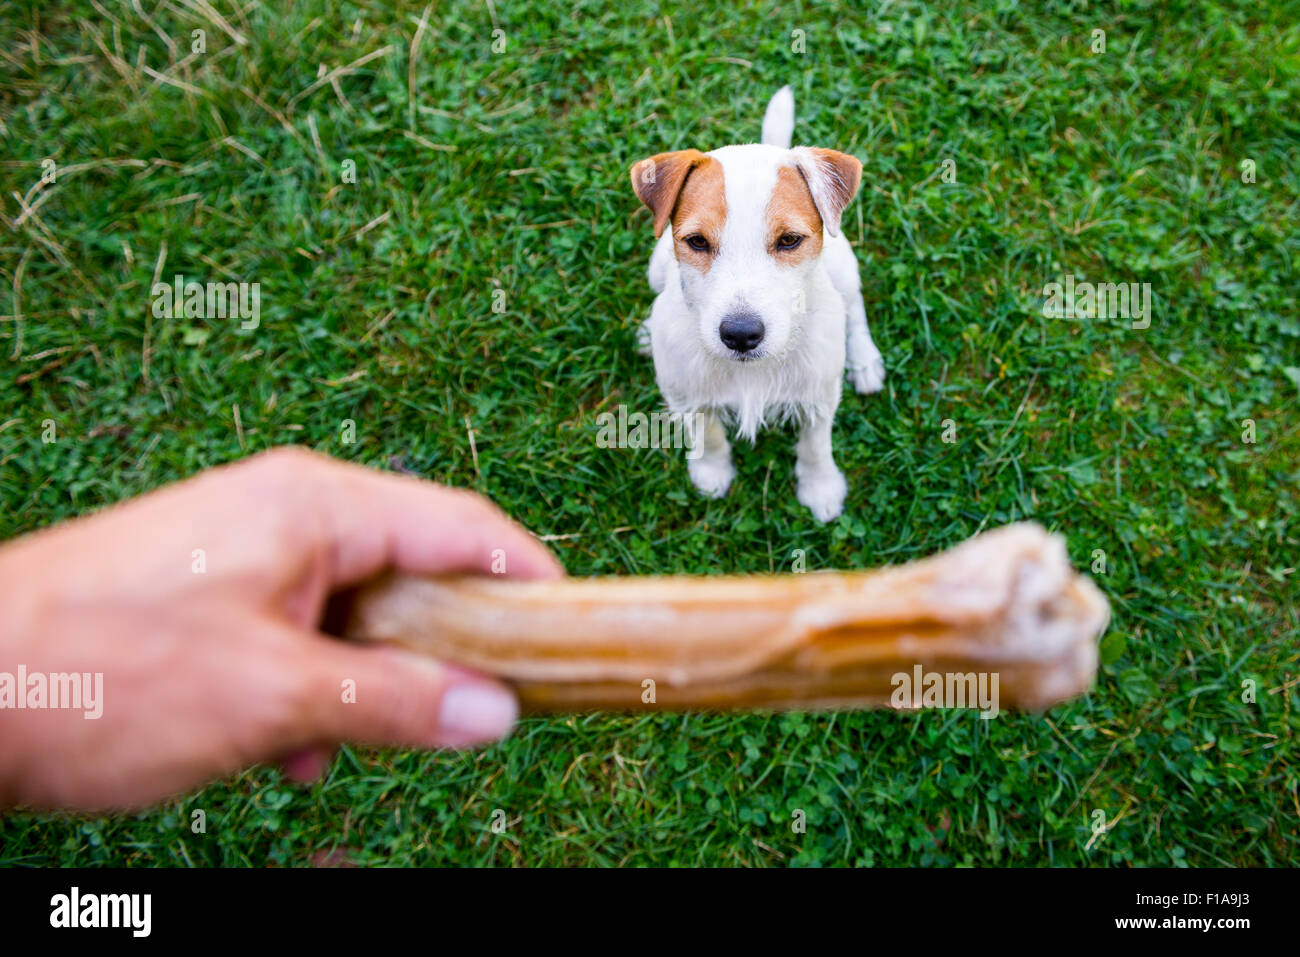 Jack Russell Parson Terrier looking at bone, outside, park, garden, backyard, hand giving bone, playing Stock Photo